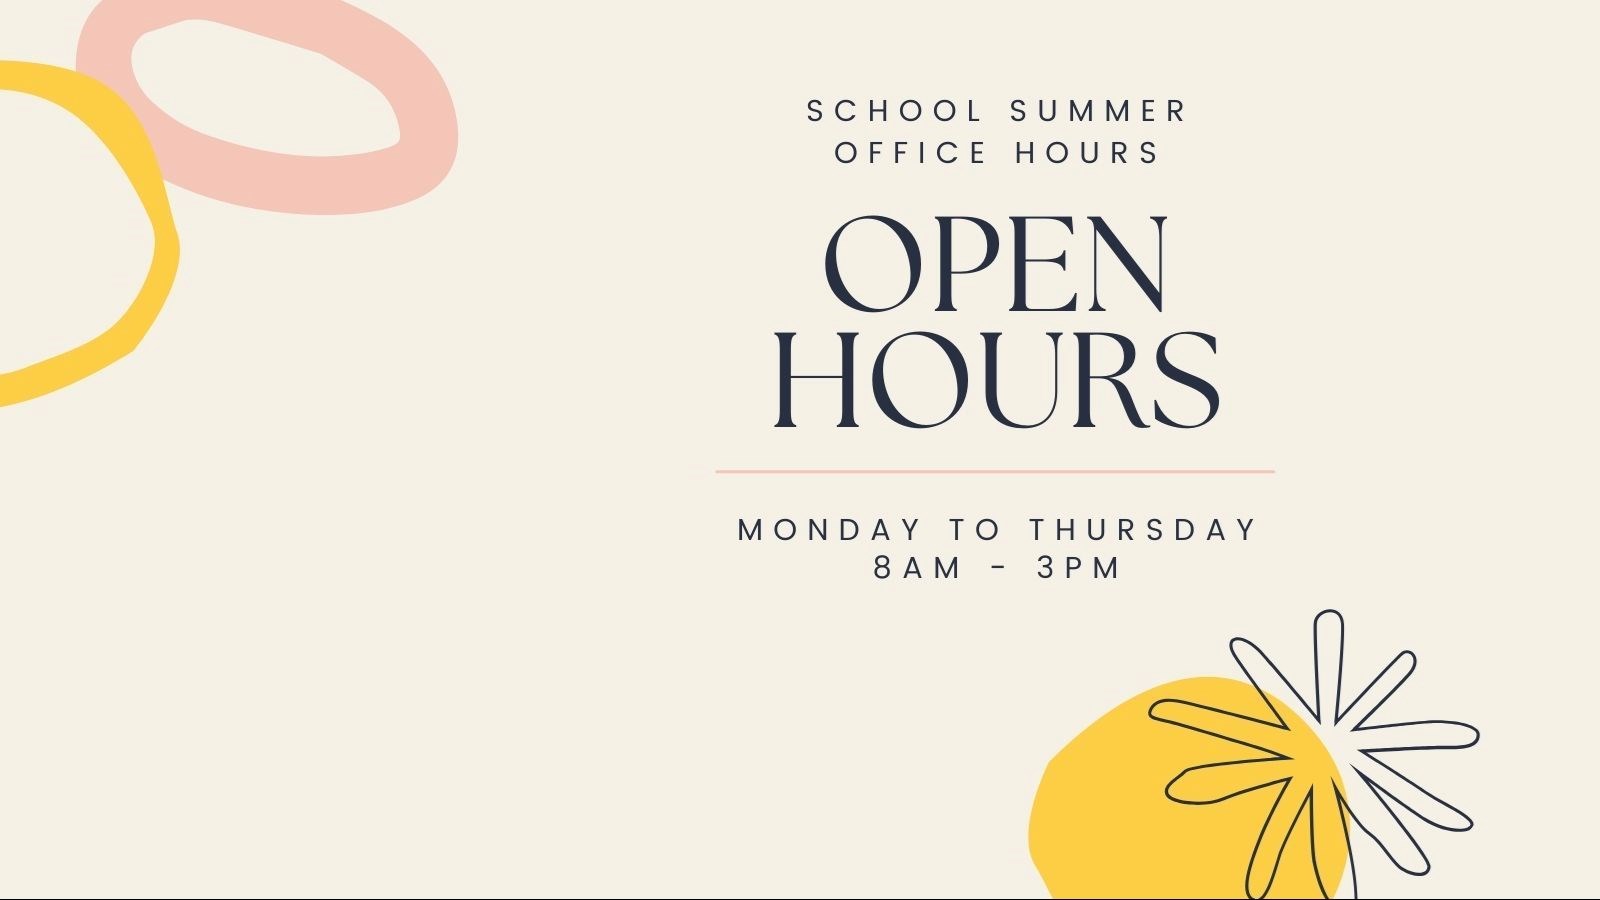 School Summer Office Hours Open Hours Monday to Thursday 8AM to 3PM.